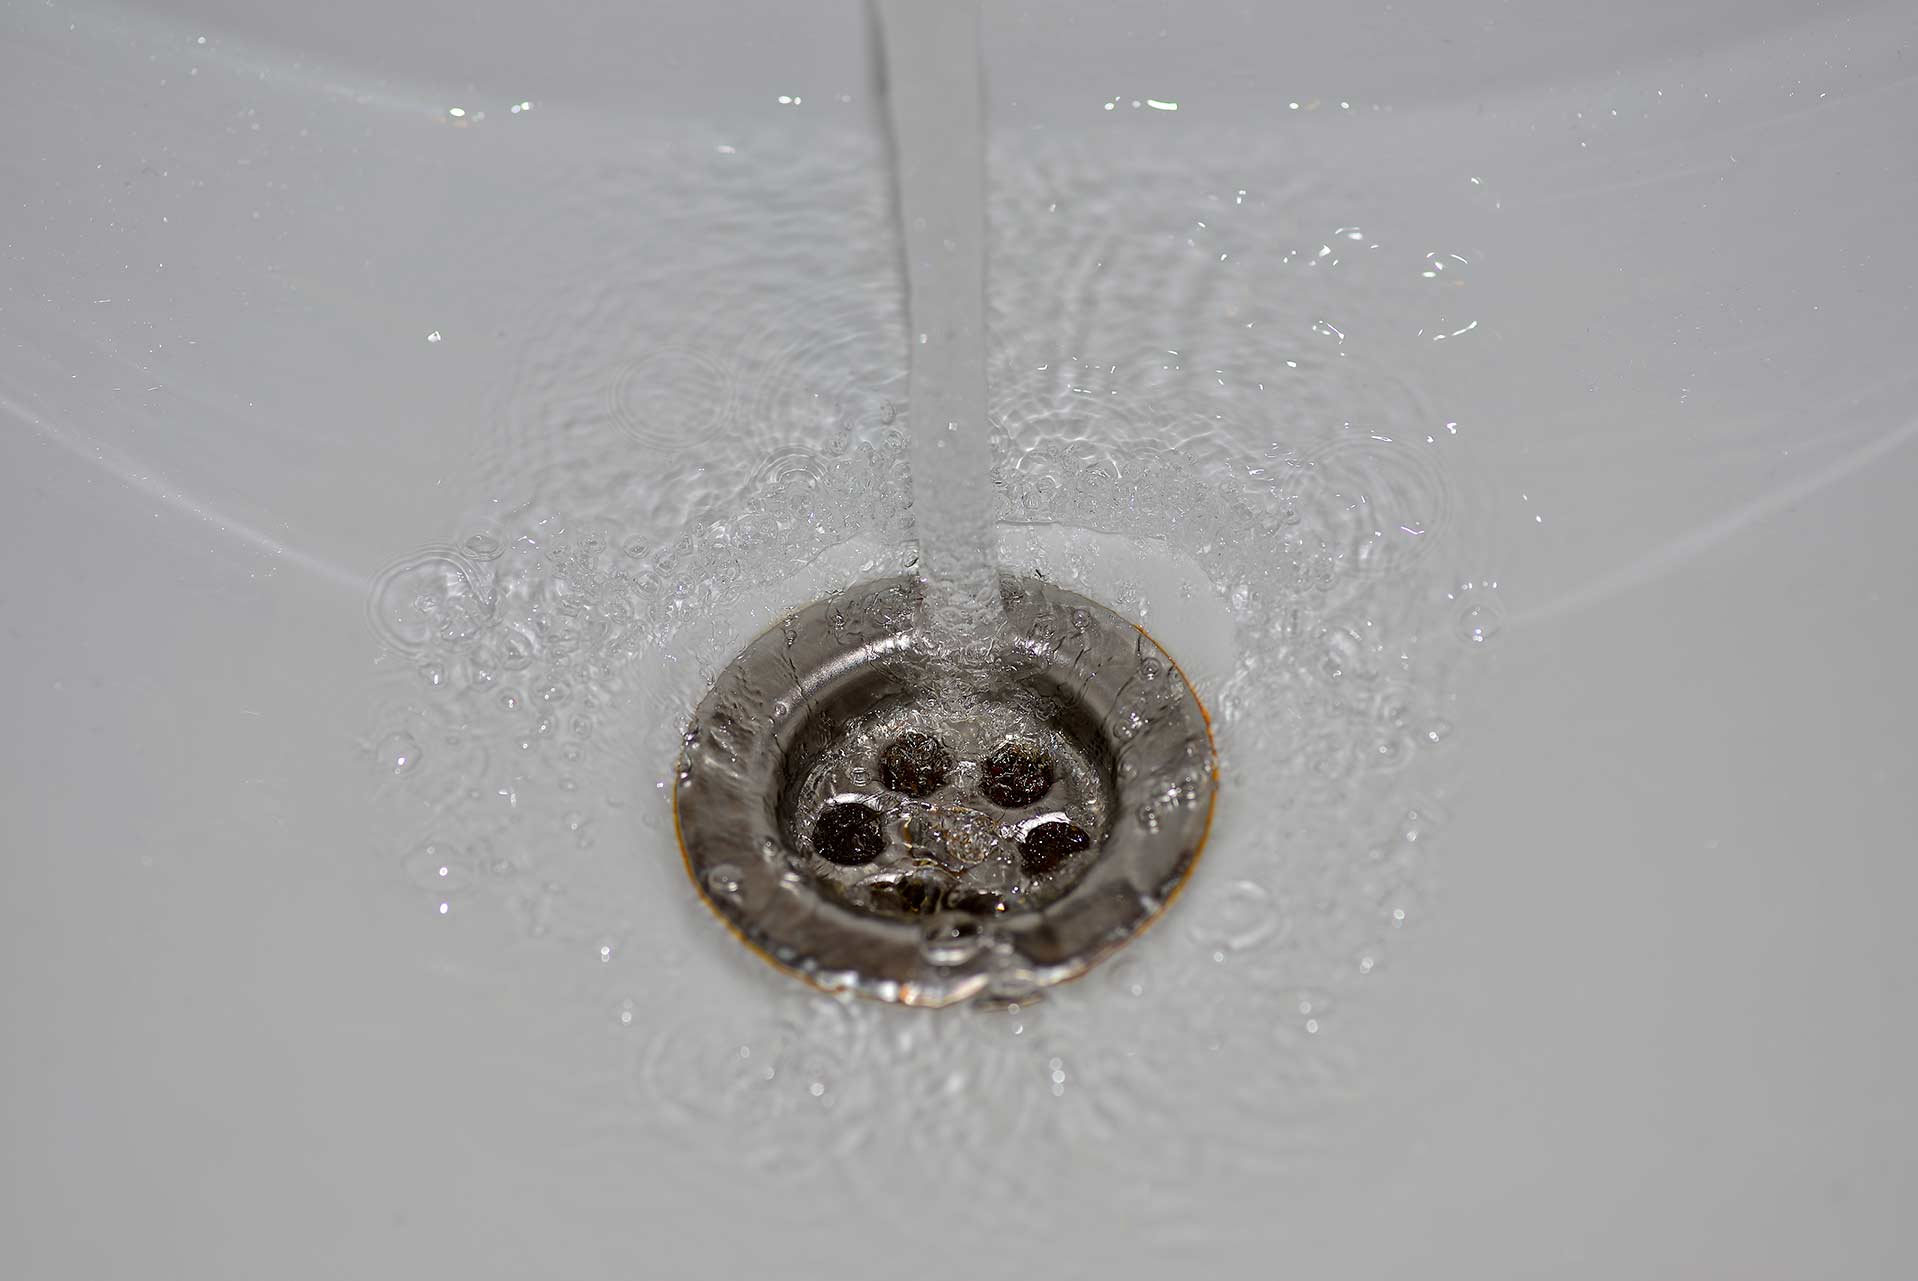 A2B Drains provides services to unblock blocked sinks and drains for properties in Welwyn Garden City.